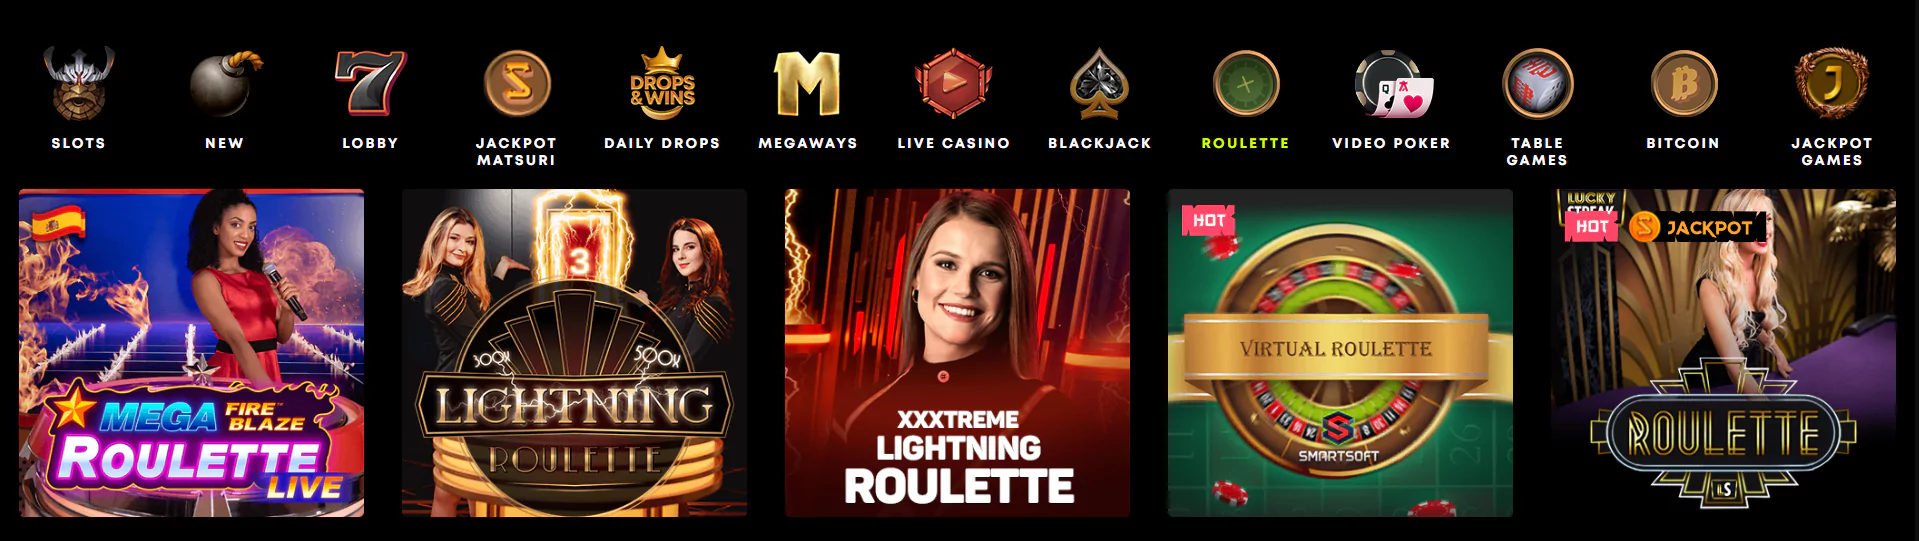 Roulette at Spin Samurai Casino - Screenshot From Official Website